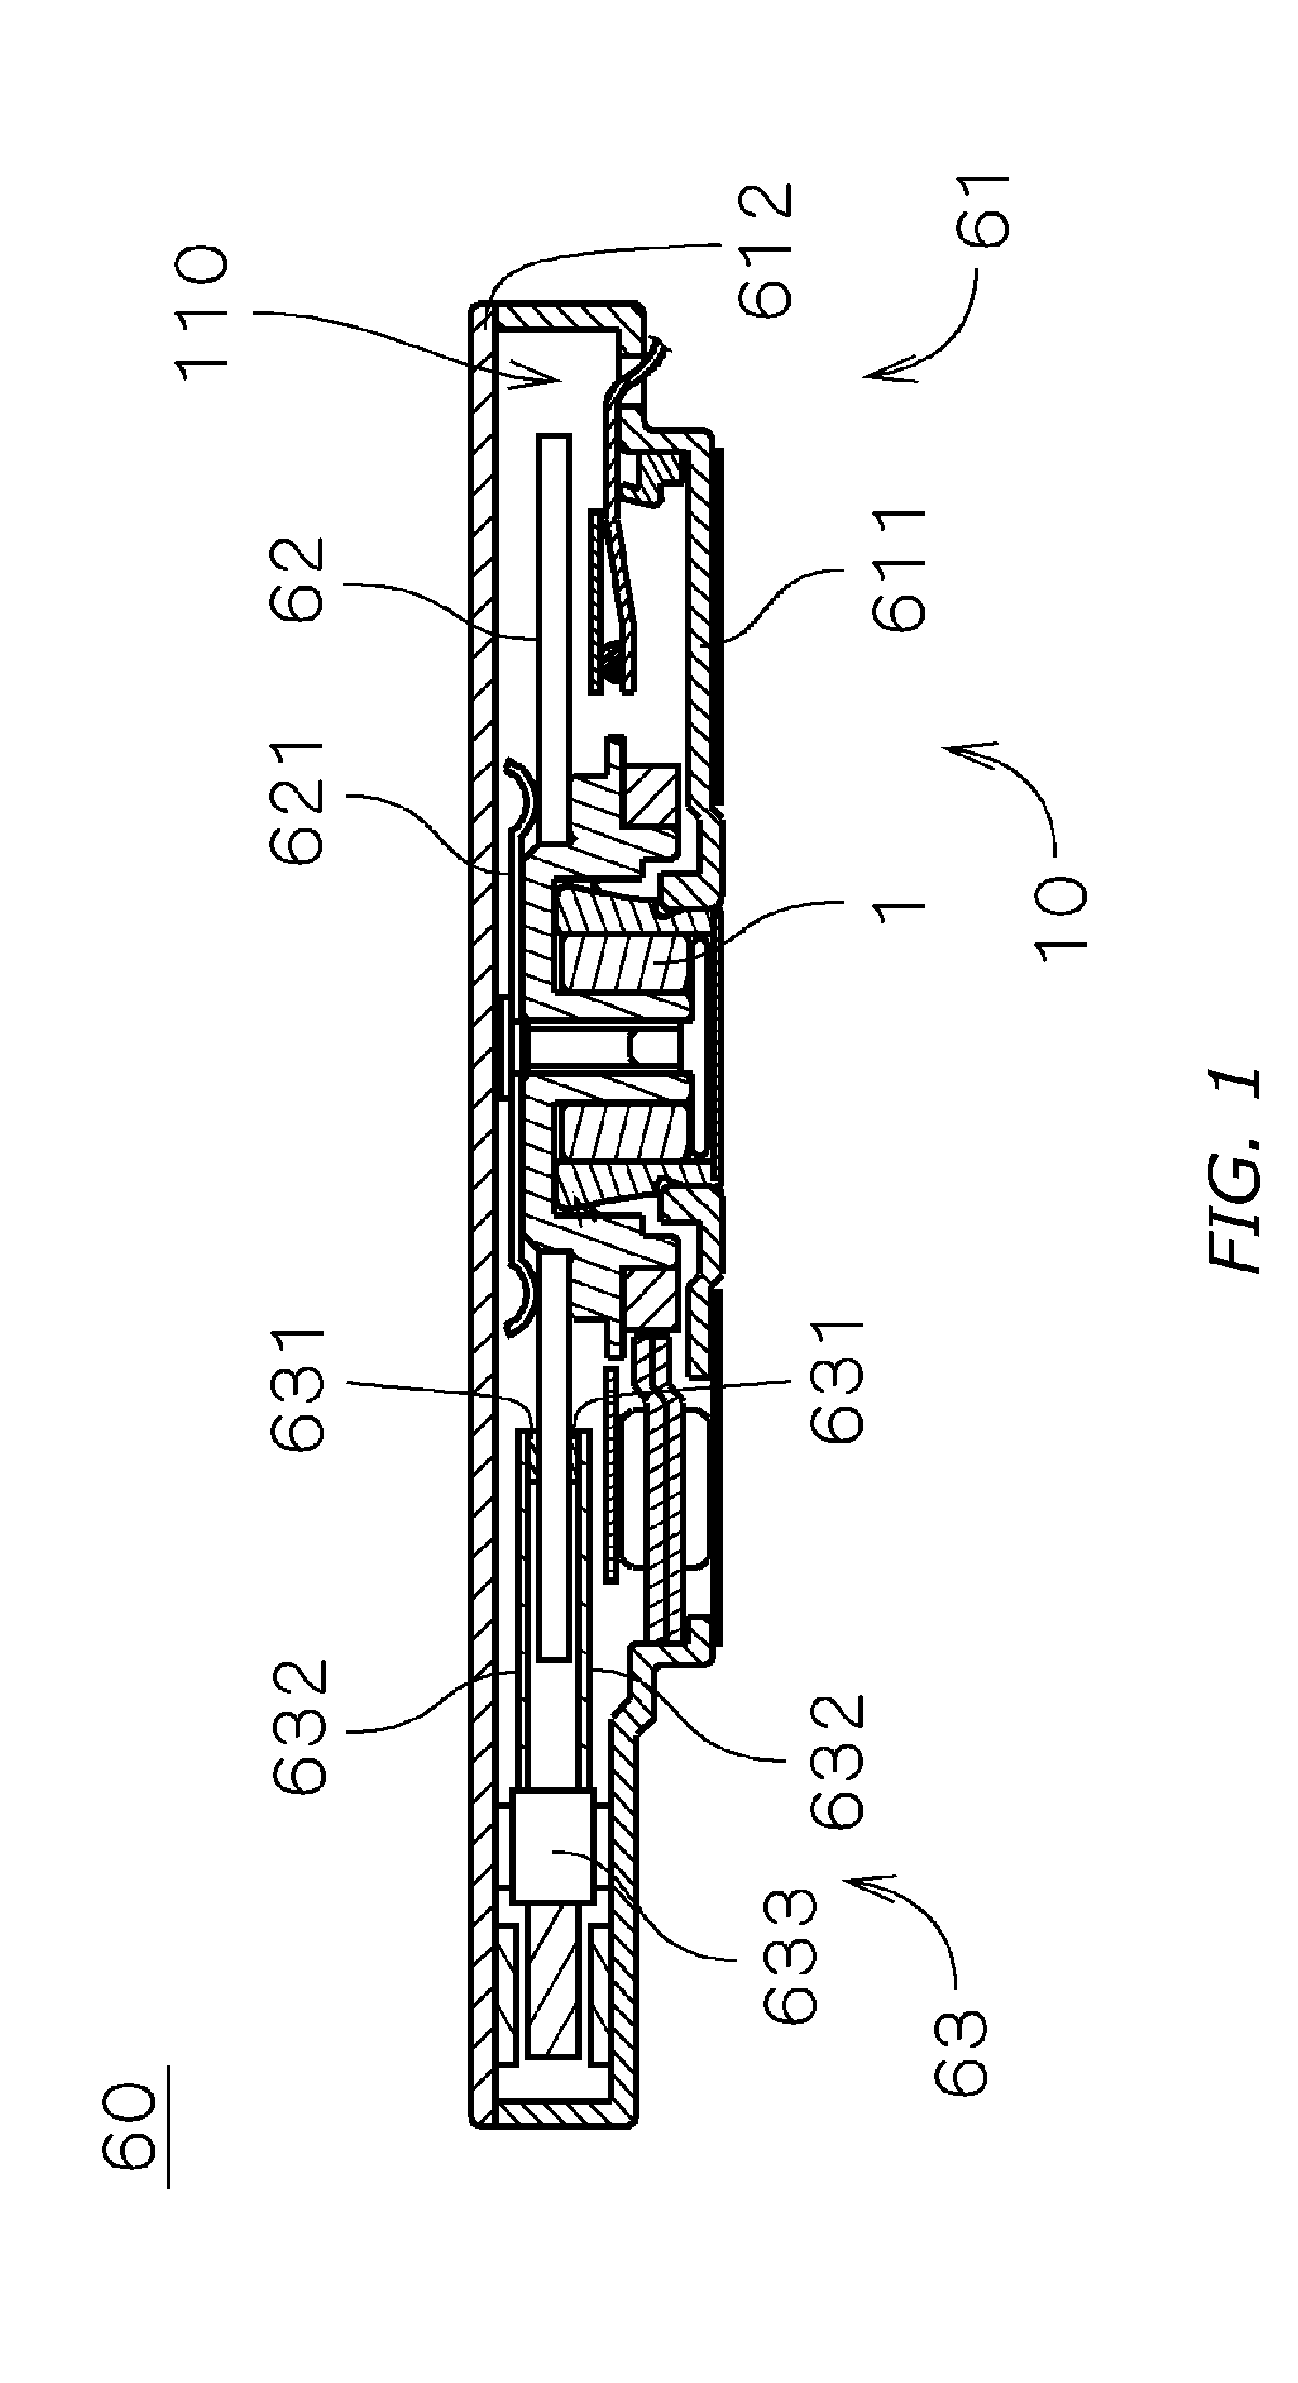 Recording disk driving device motor unit having a sheet member attached to a base